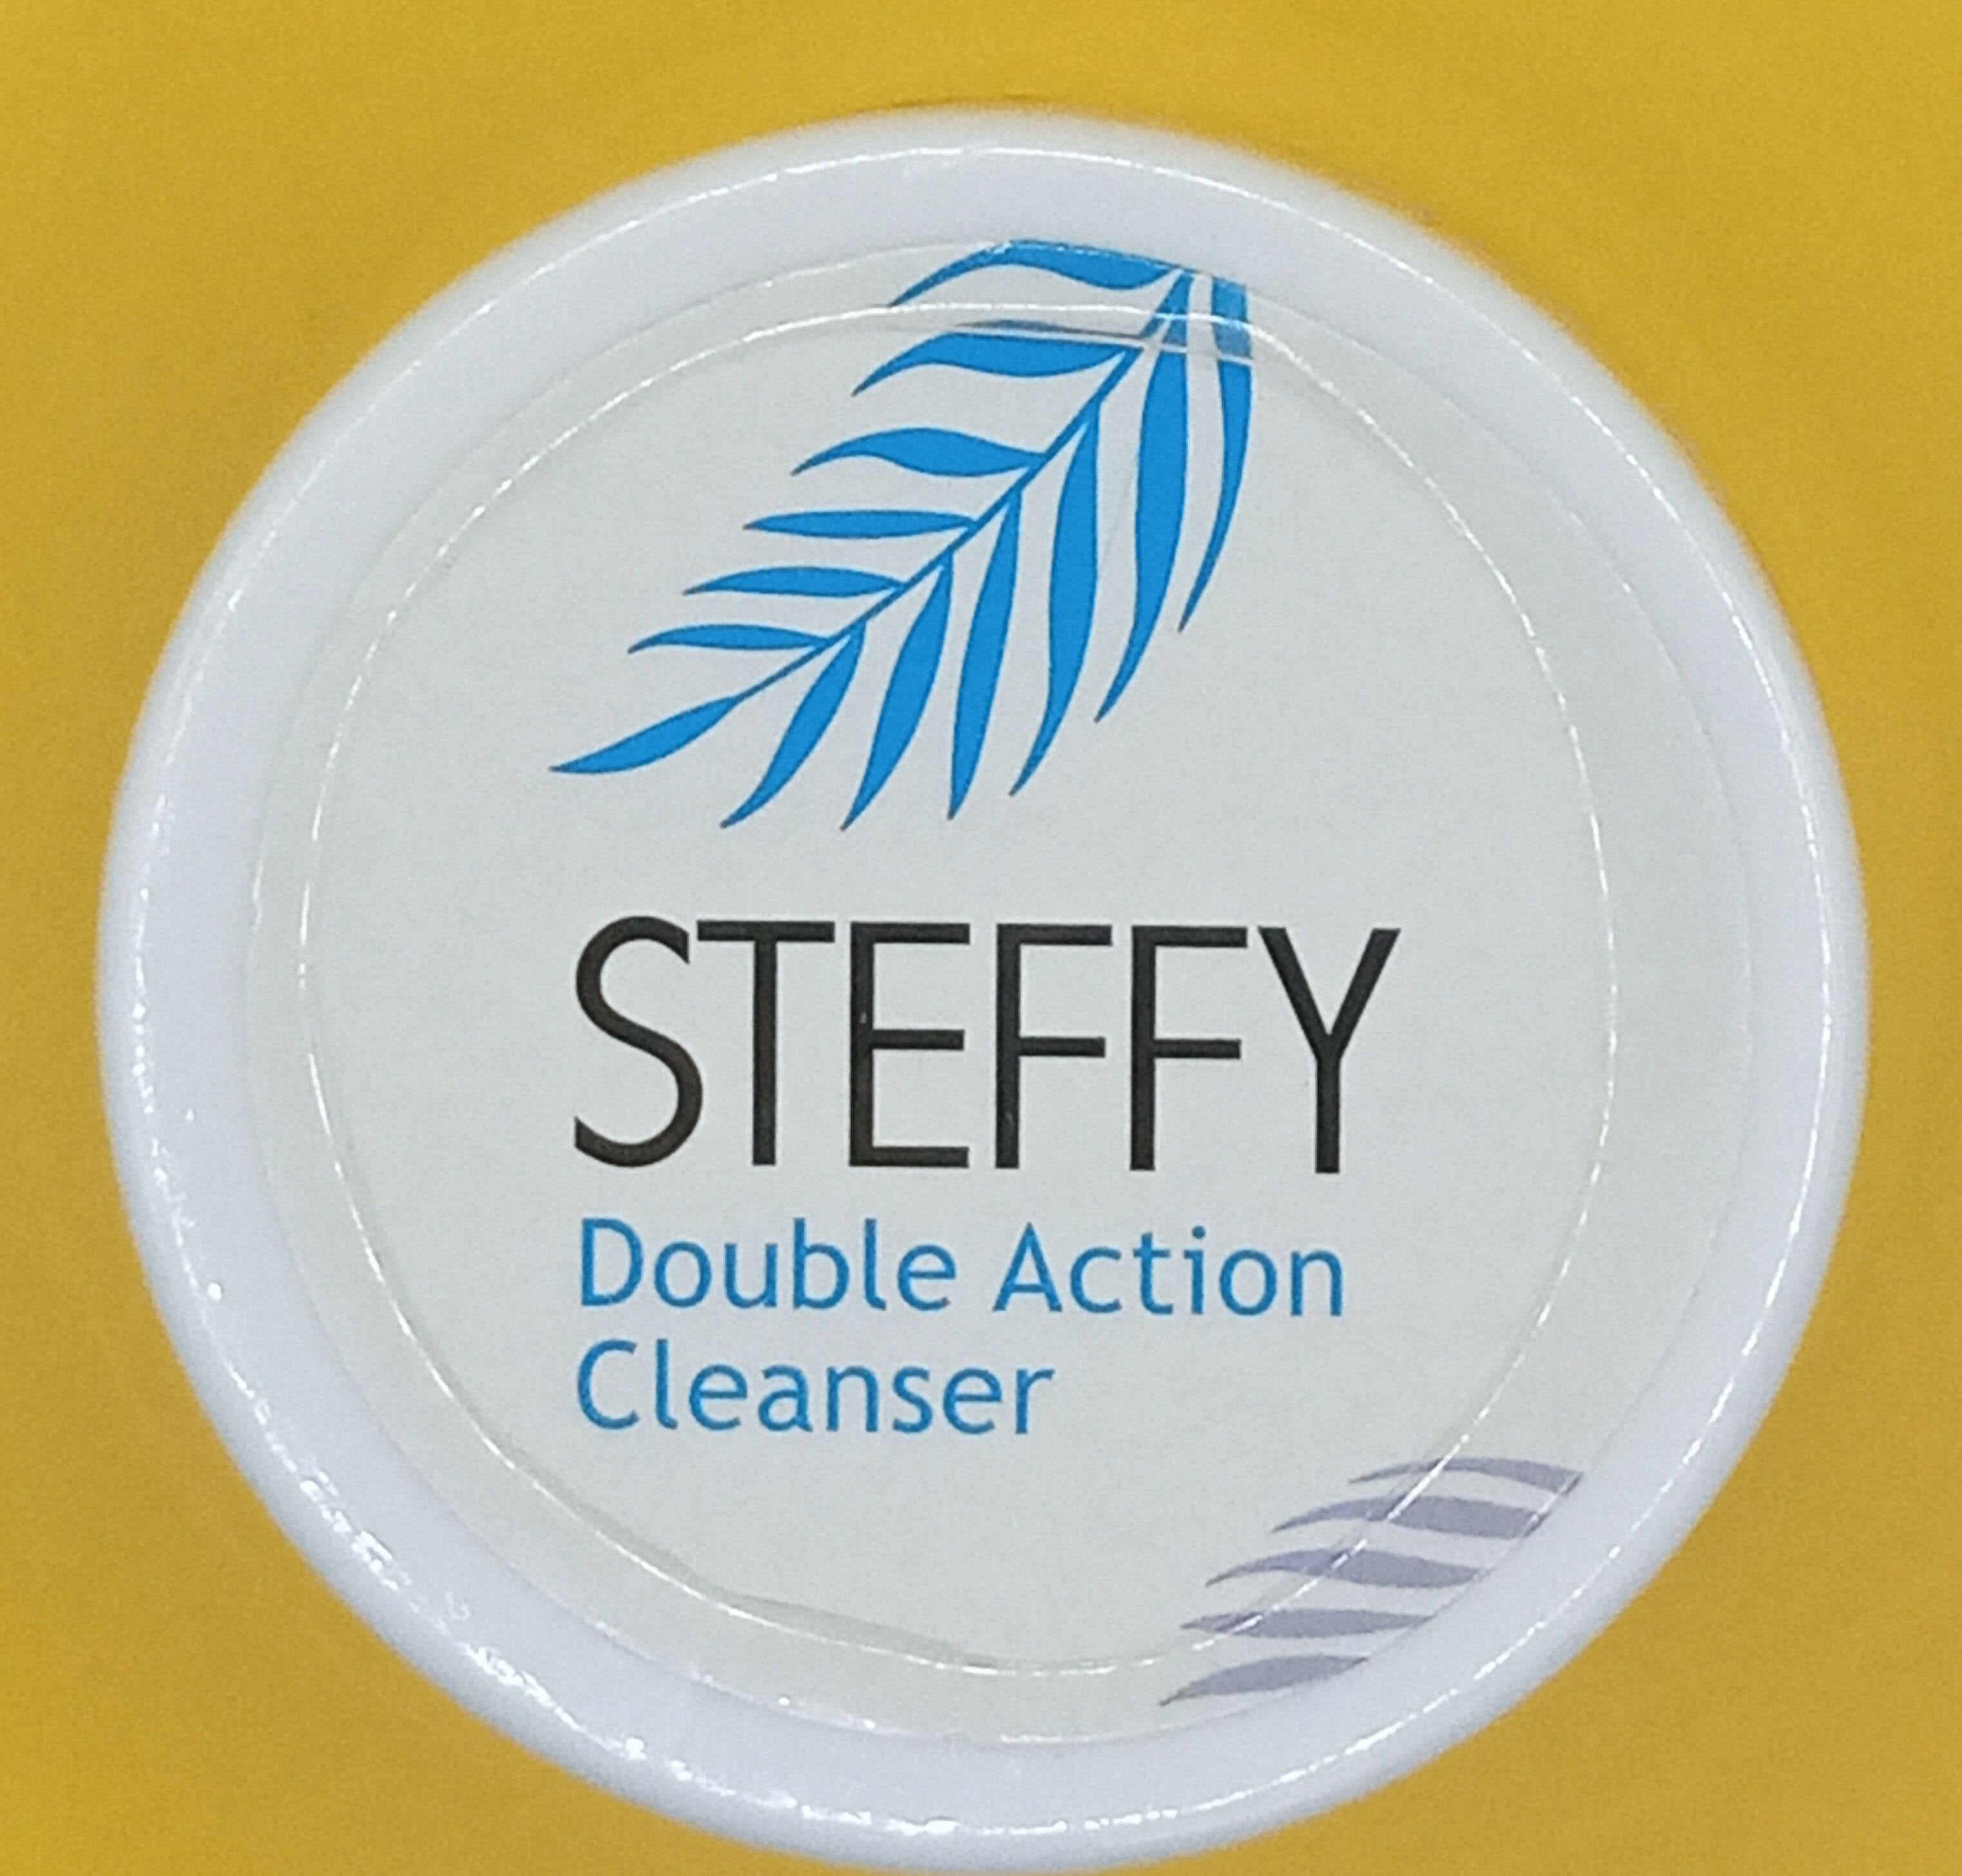 Steffy Double Action Cleanser